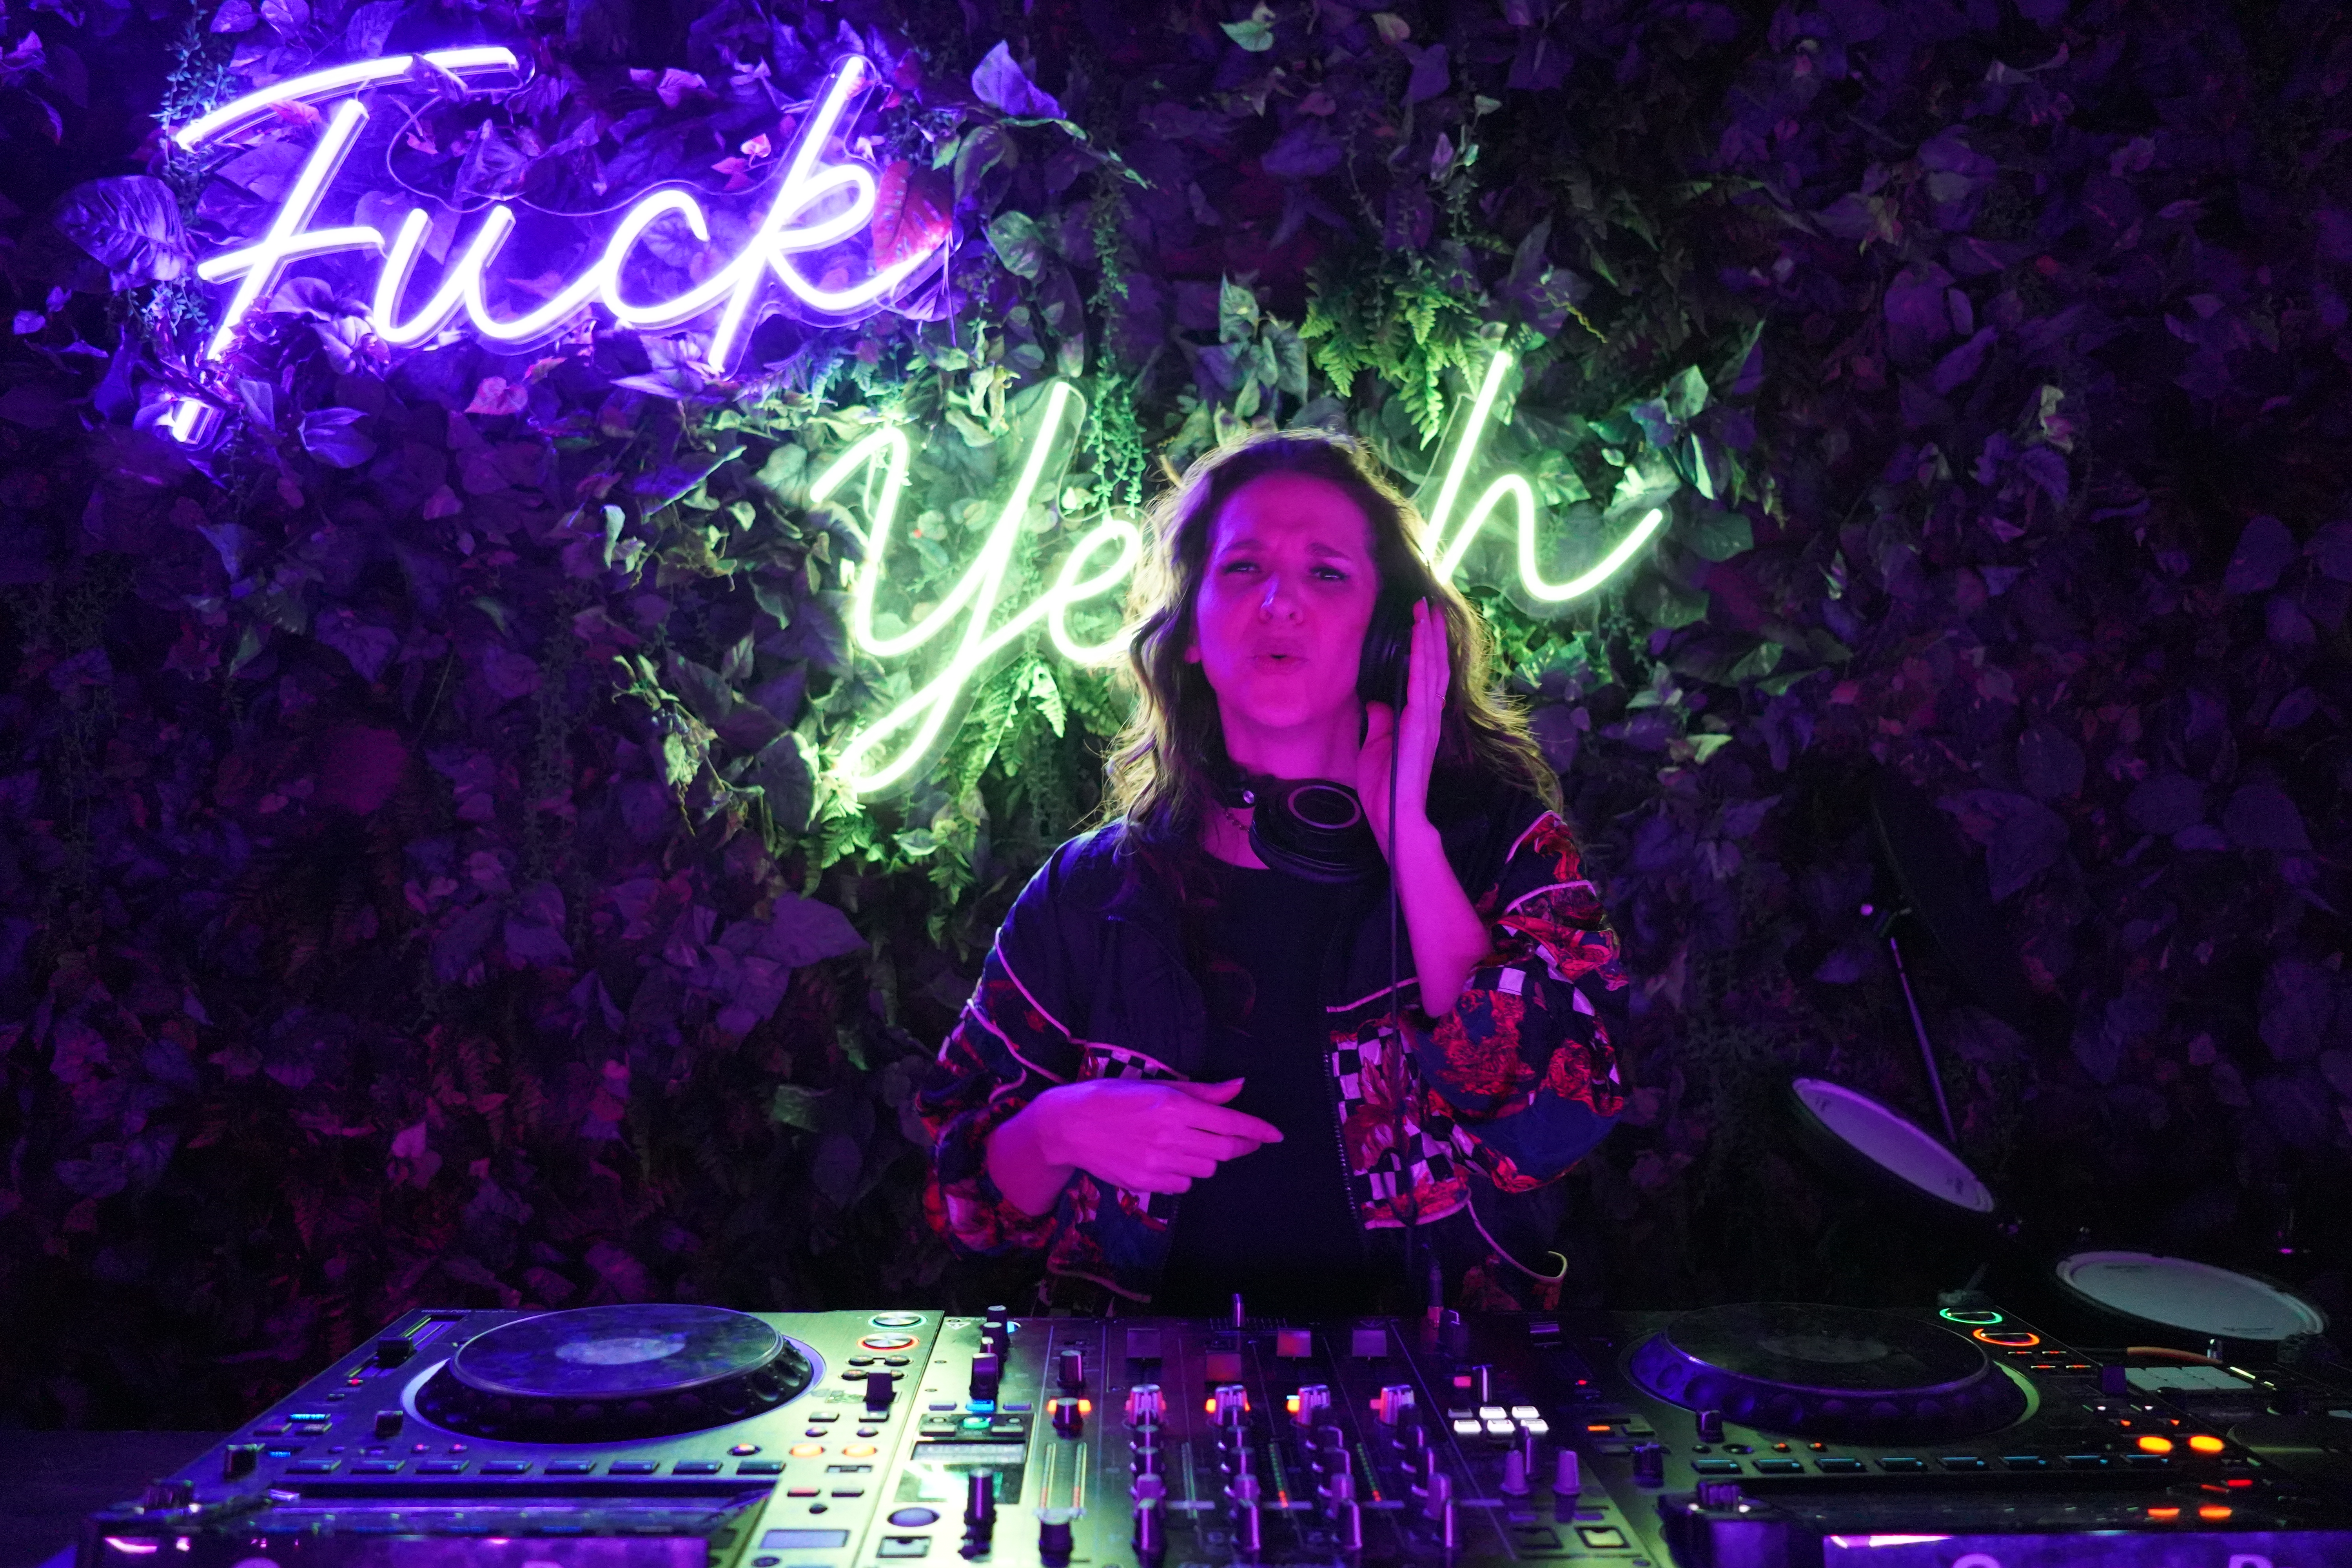 IZBO DJing under a neon sign at Beacon in Denver. She is an unsigned bass house DJ and vocalist.